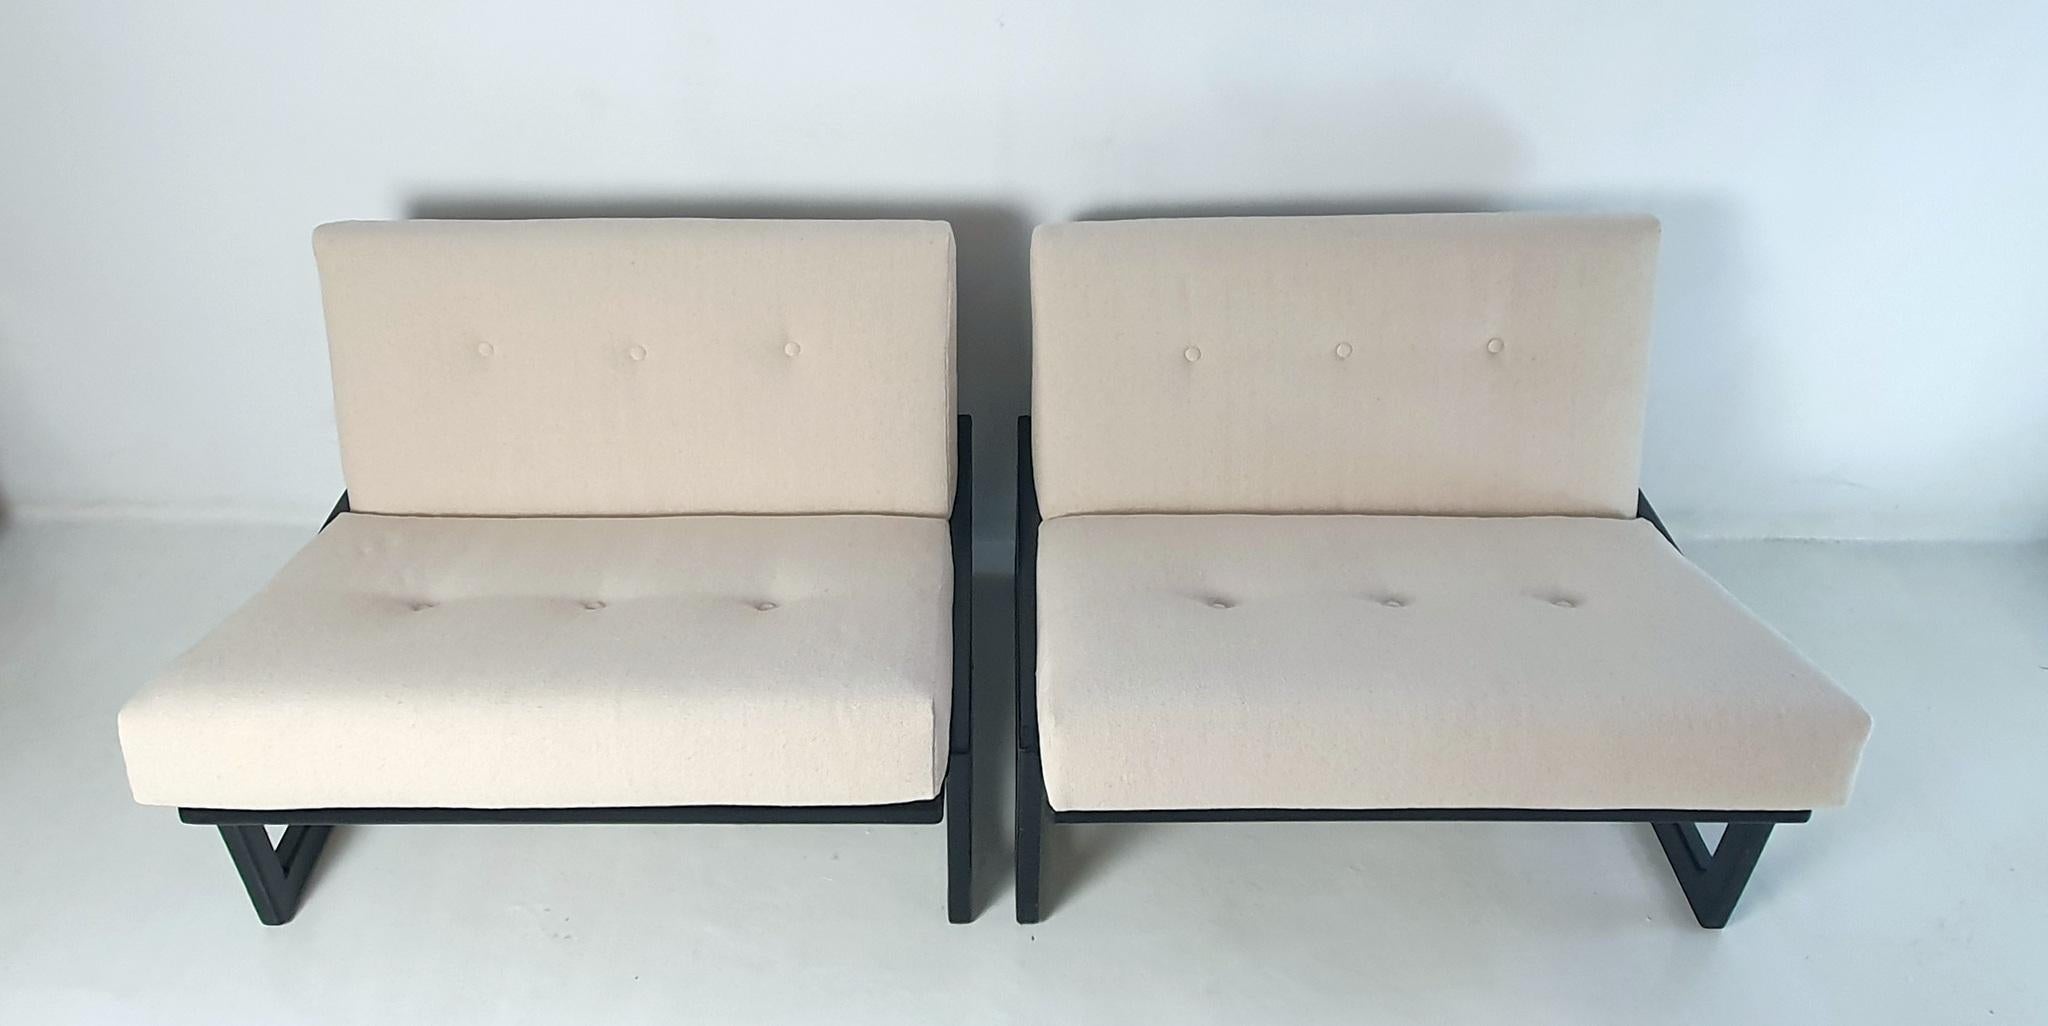 Introducing the fabulous pair of Italian 'Carlotta' armchairs designed in 1967 by Afra & Tobia Scarpa for Cassina. These babies have undergone a complete professional makeover, with brand new cushions in high-quality cotton/linen fabric and a frame